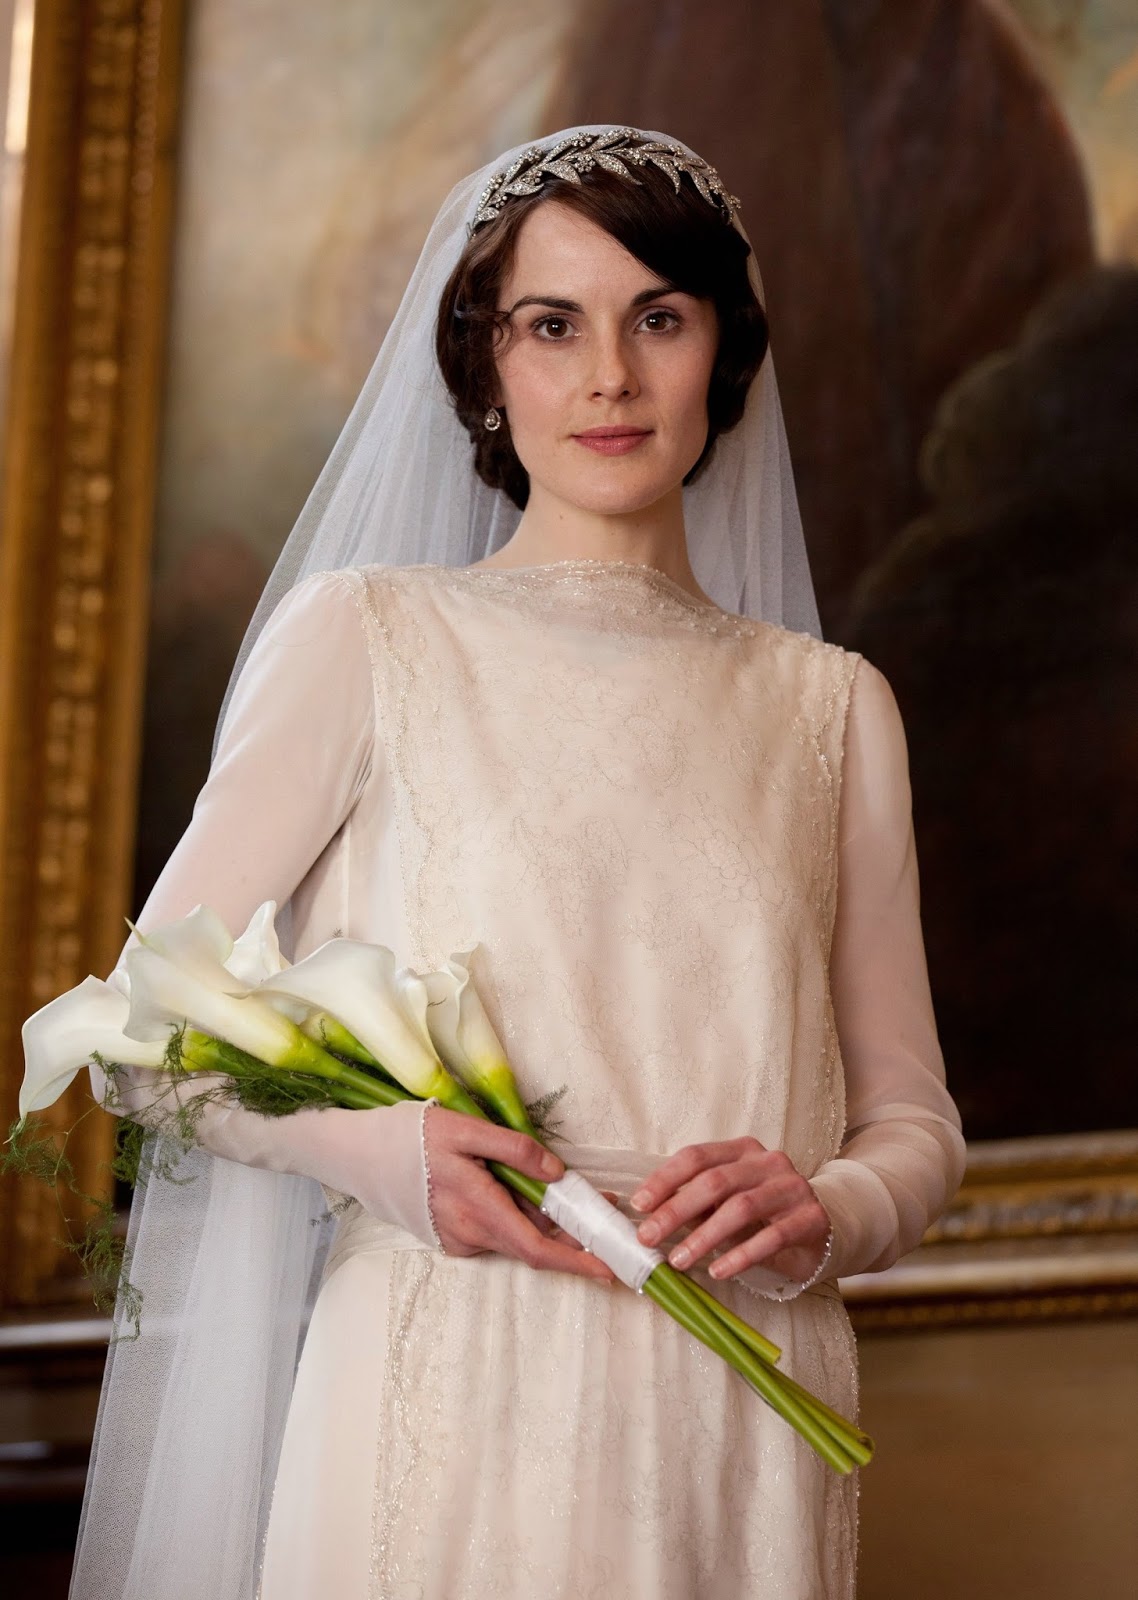 vintage wedding dresses with sleeves  ,sheer long sleeves and column shape.And the headpiece and long veil